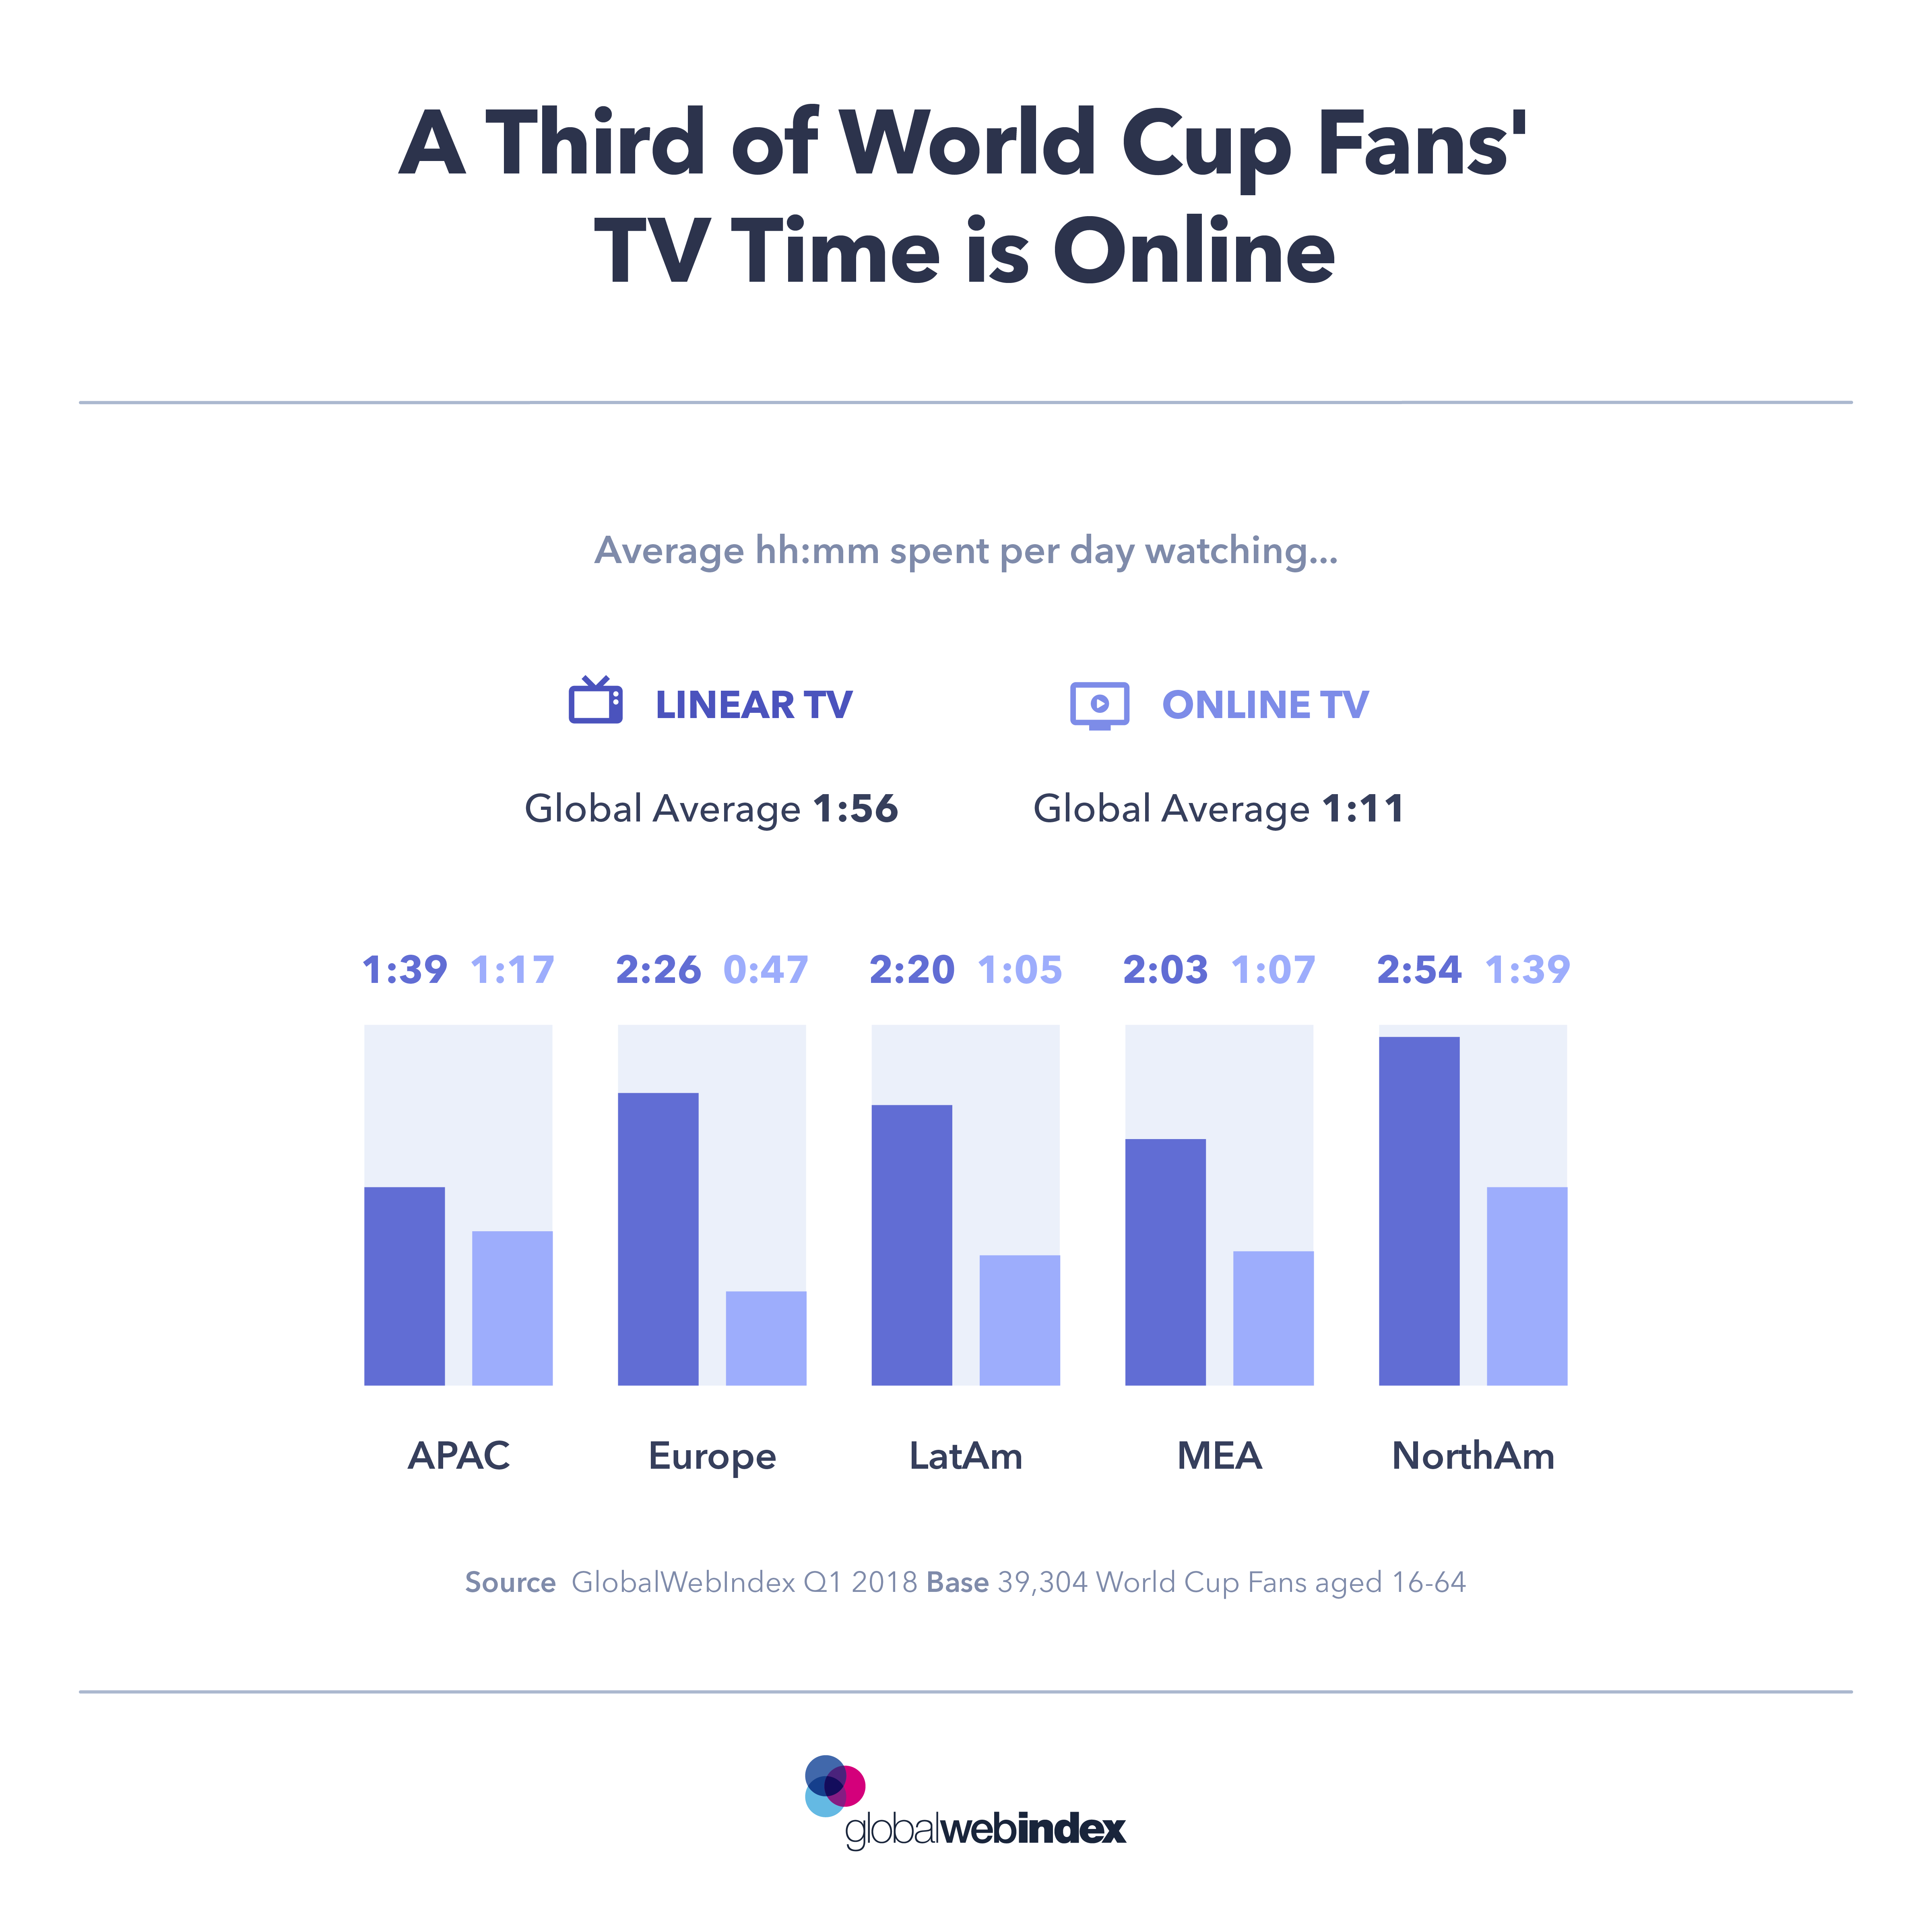 A Third of World Cup Fans TV Time is Online